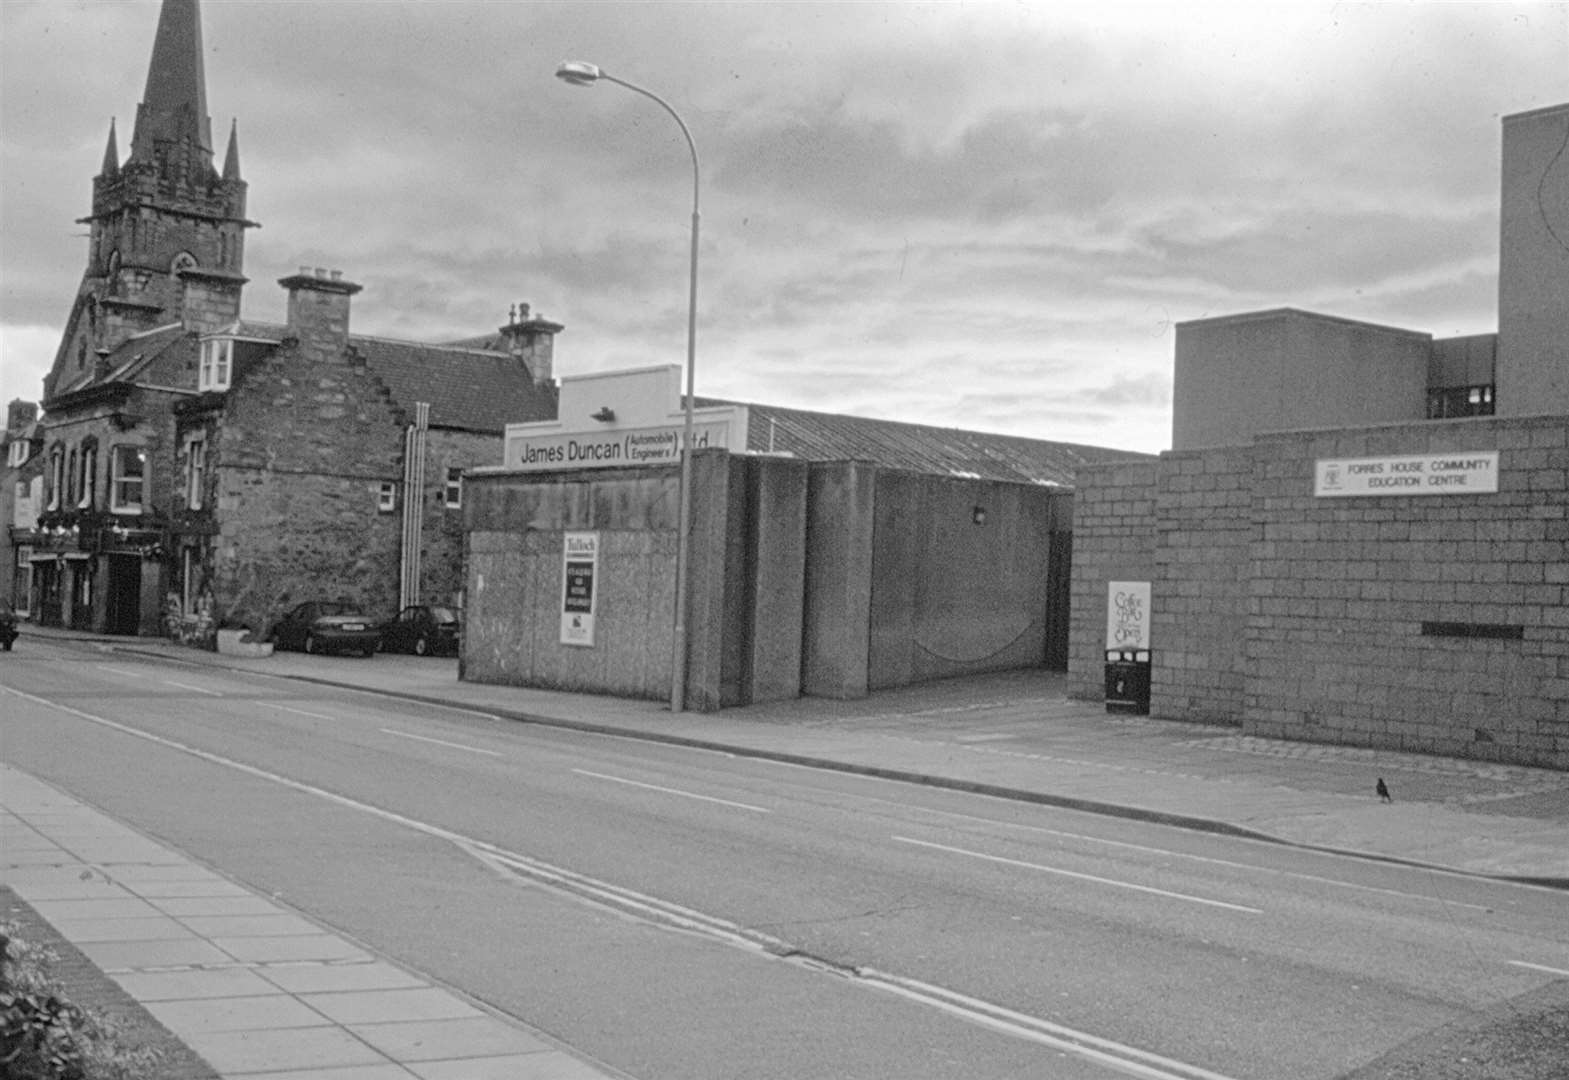 Forres Community Centre and Duncan's Garage in the 1970's